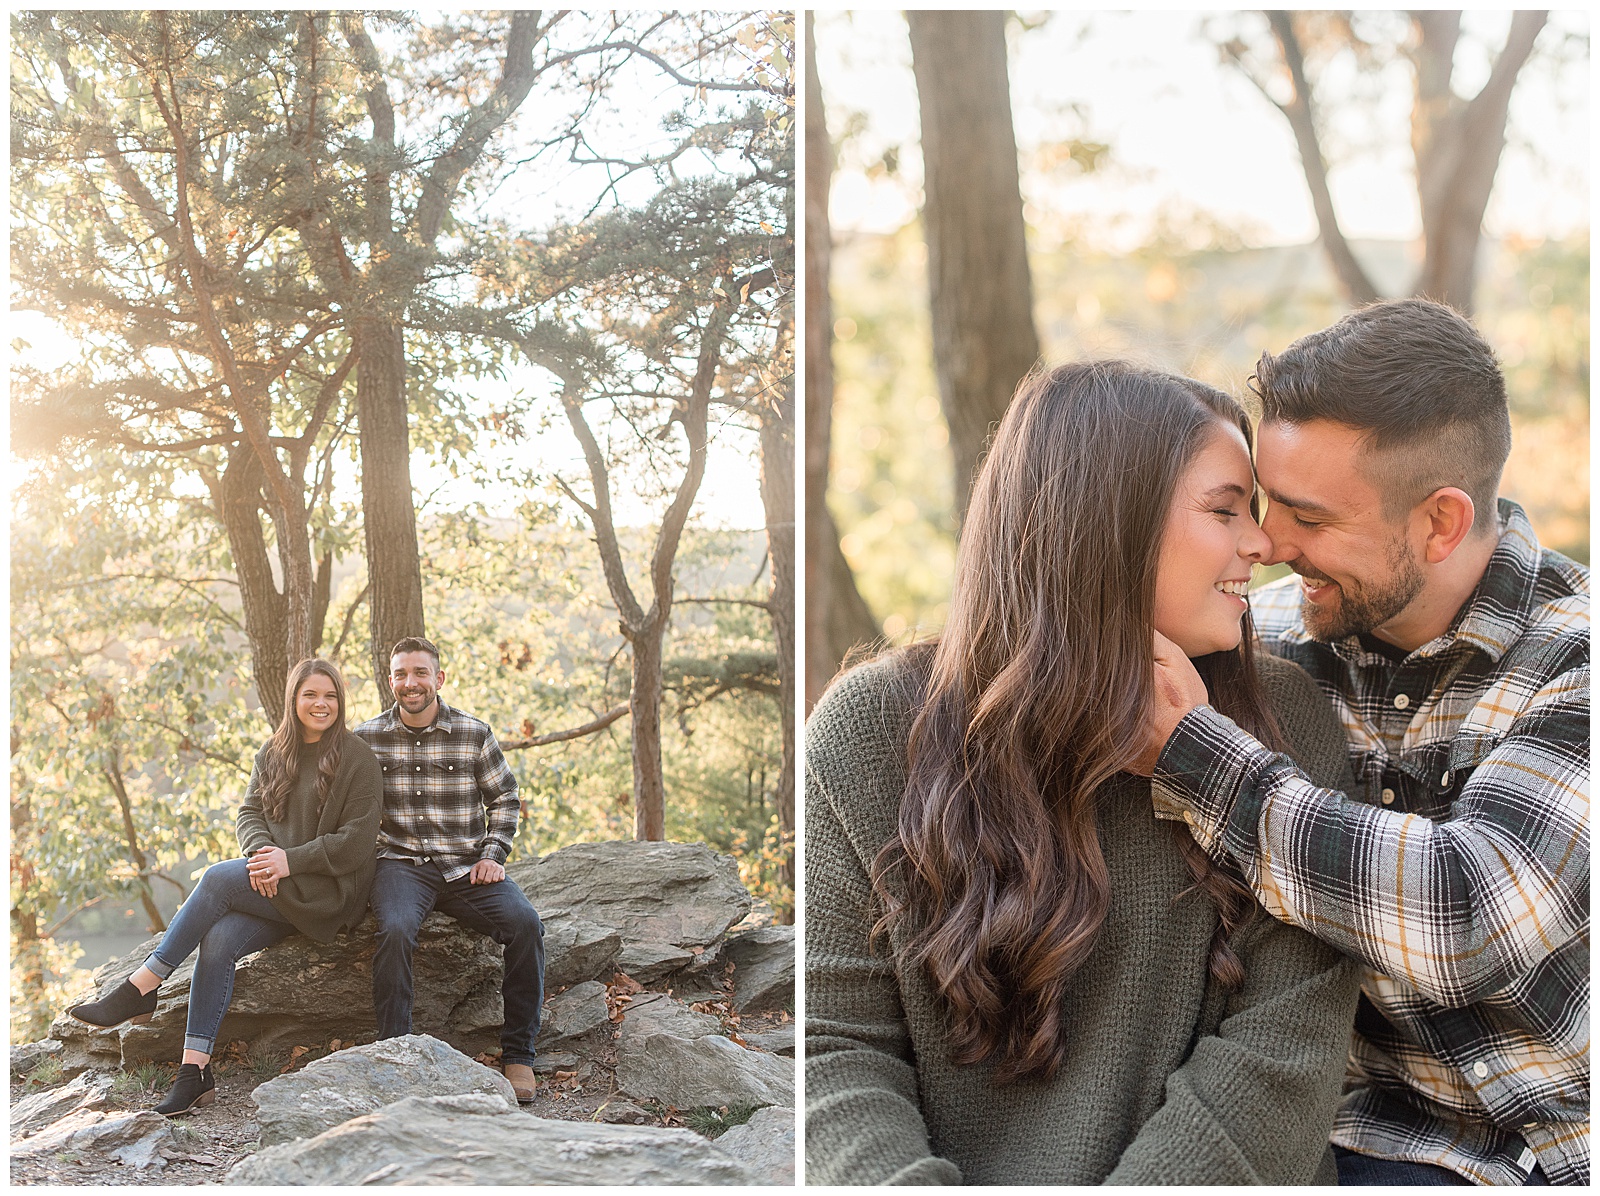 couple sitting on large rocks with girl wearing dark green sweatshirt and jeans and guy wearing flannel shirt and jeans on fall day